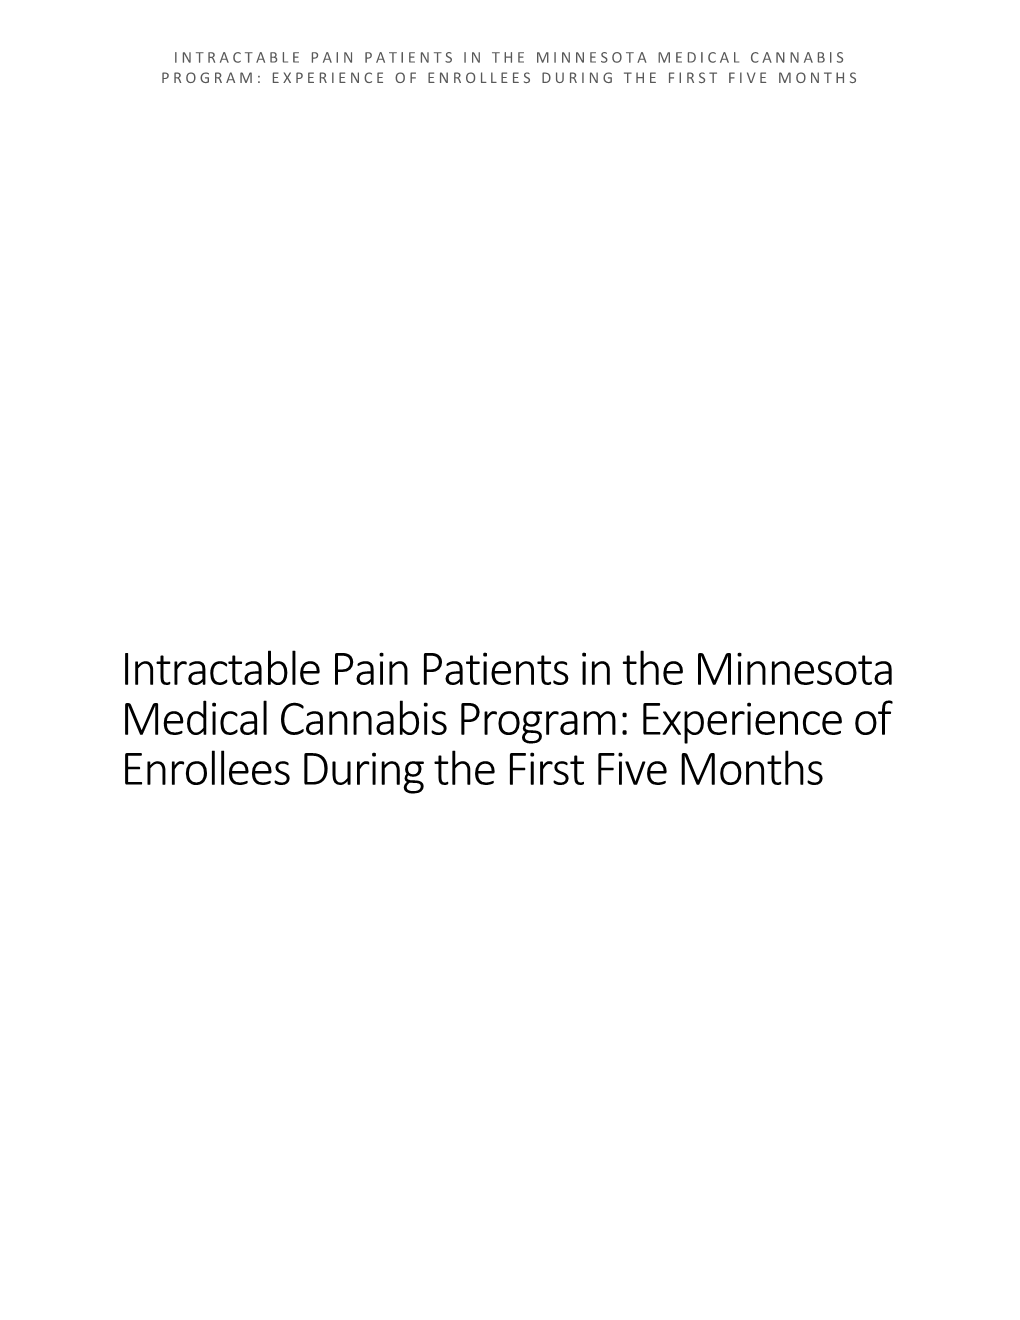 Intractable Pain Patients in the Minnesota Medical Cannabis Program: Experience of Enrollees During the First Five Months